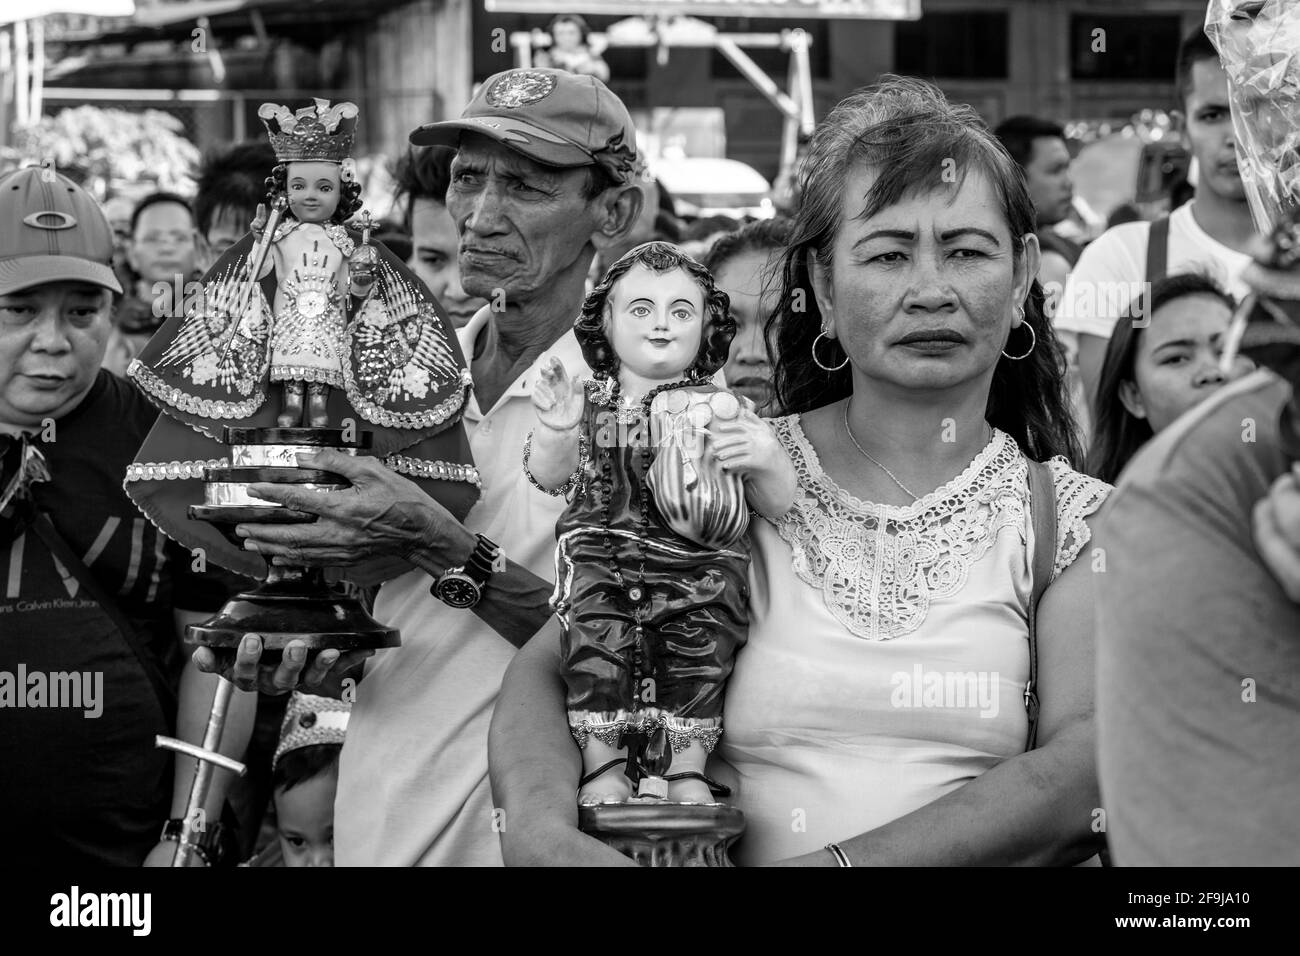 Local People Wait With Their Santo Nino Statues For The Fluvial Procession, Dinagyang Festival, Iloilo, The Philippines. Stock Photo